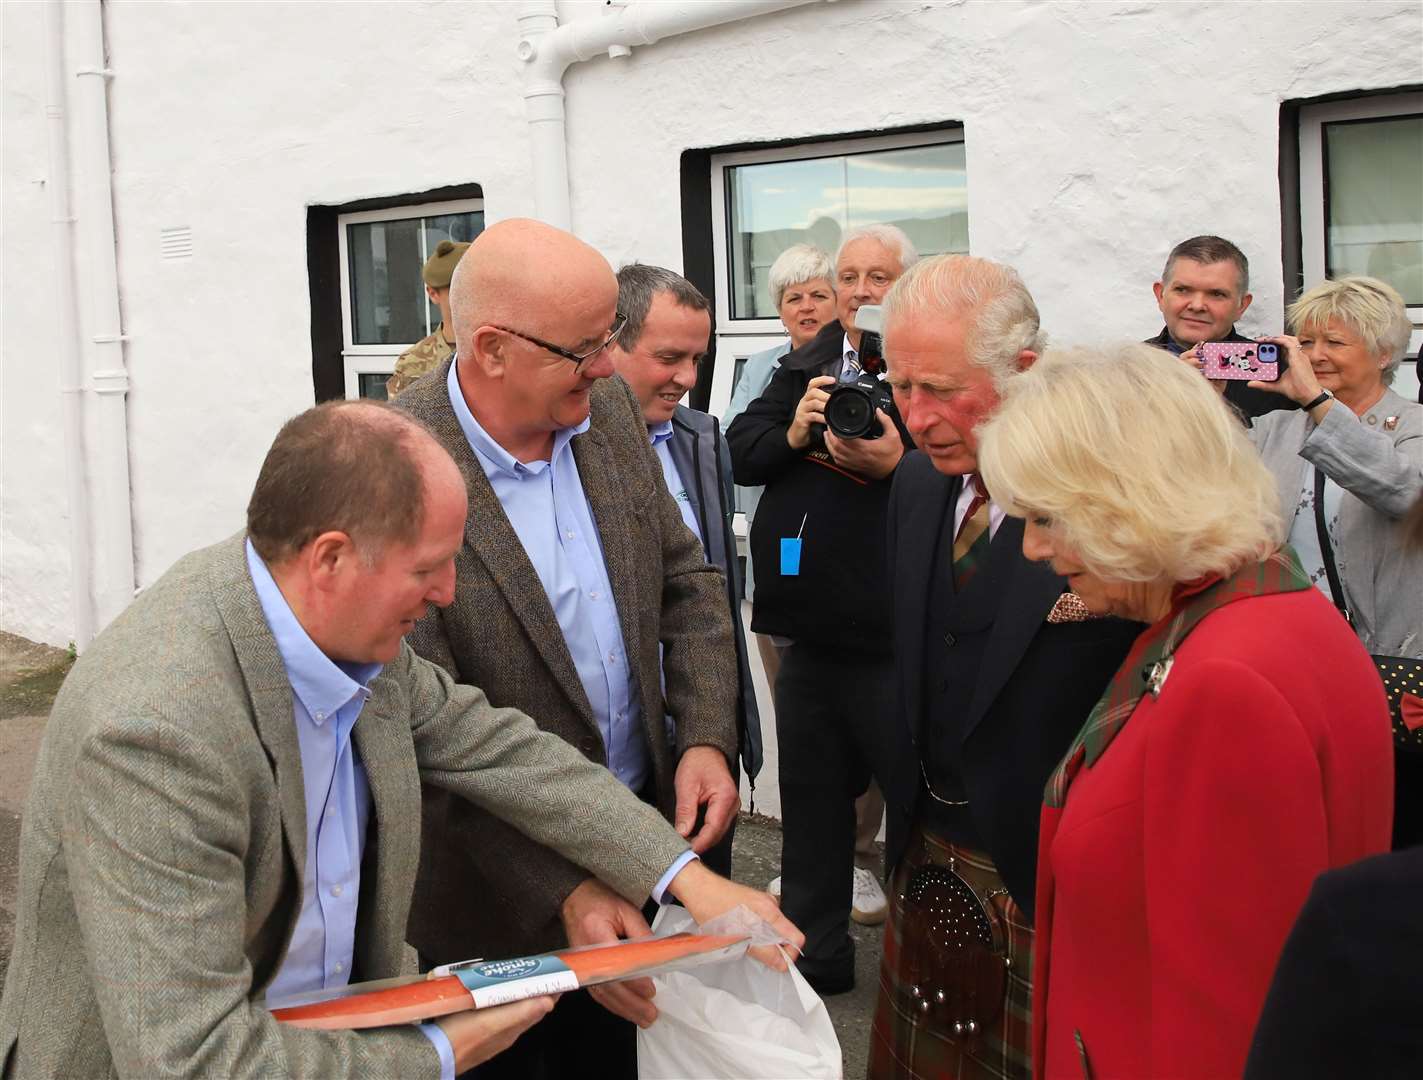 The Duke and Duchess of Rothesay are given a fish to take away.